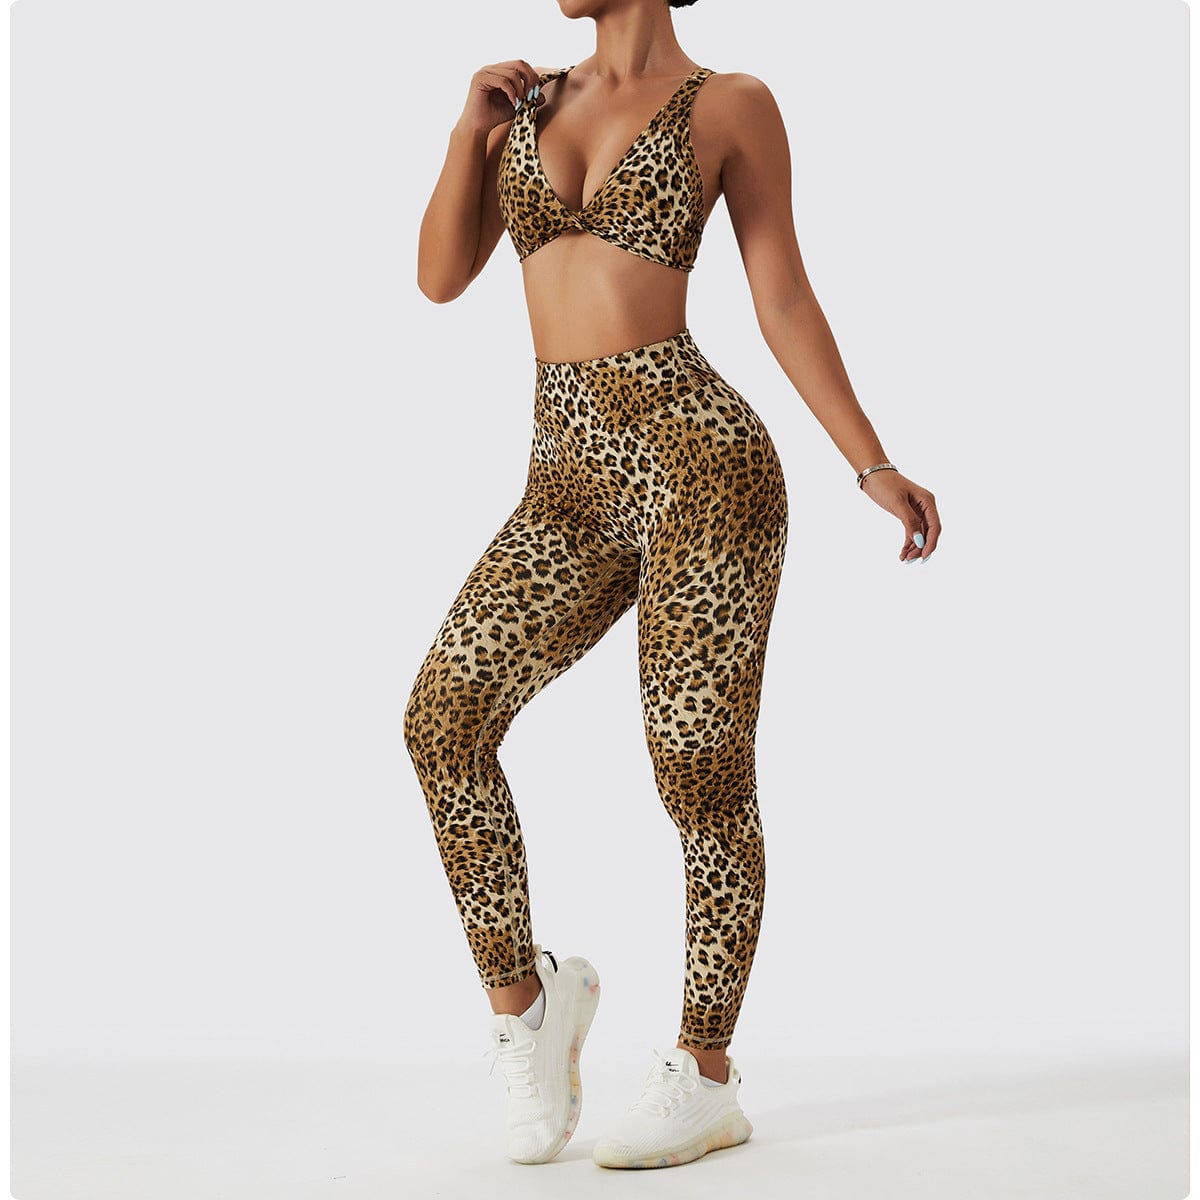 Everyday Yoga Radiant Cheetah Strappy Back Sports Bra at YogaOutlet.com –